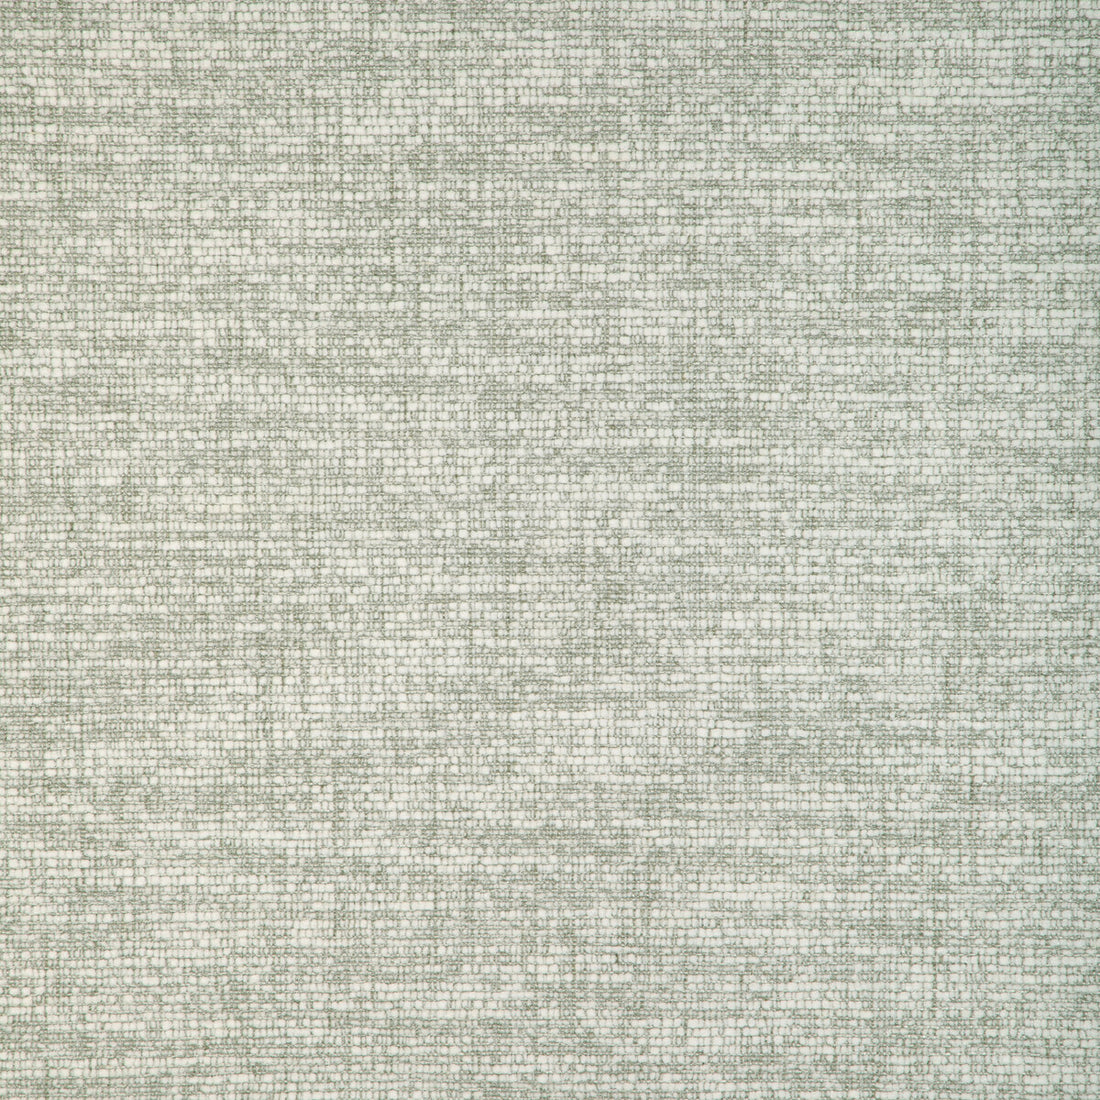 Chenille Aura fabric in mist color - pattern 36871.15.0 - by Kravet Couture in the Atelier Weaves collection